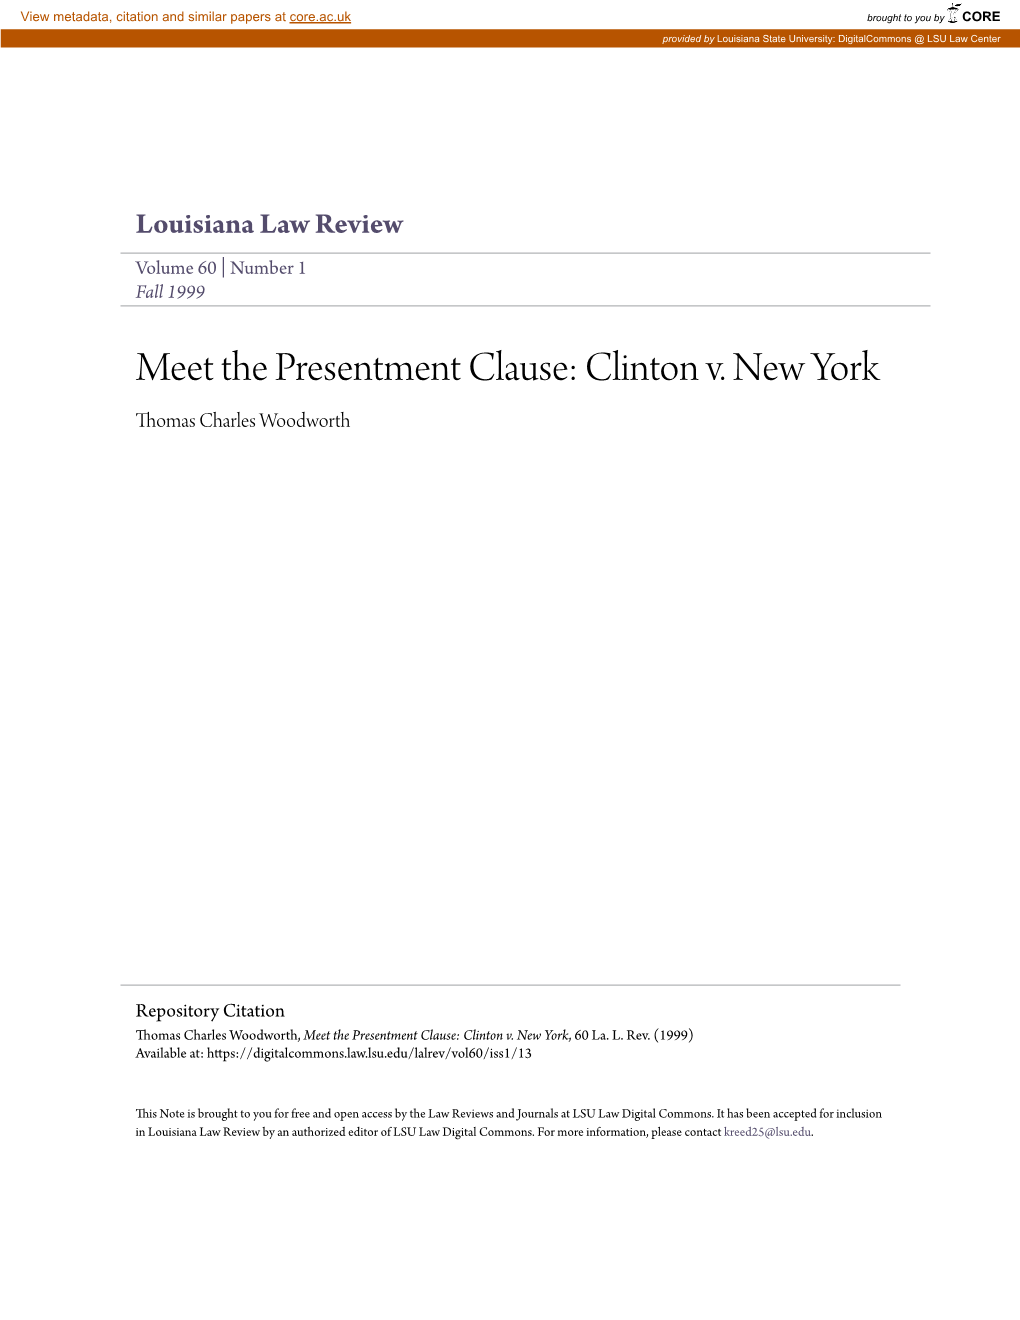 Meet the Presentment Clause: Clinton V. New York Thomas Charles Woodworth